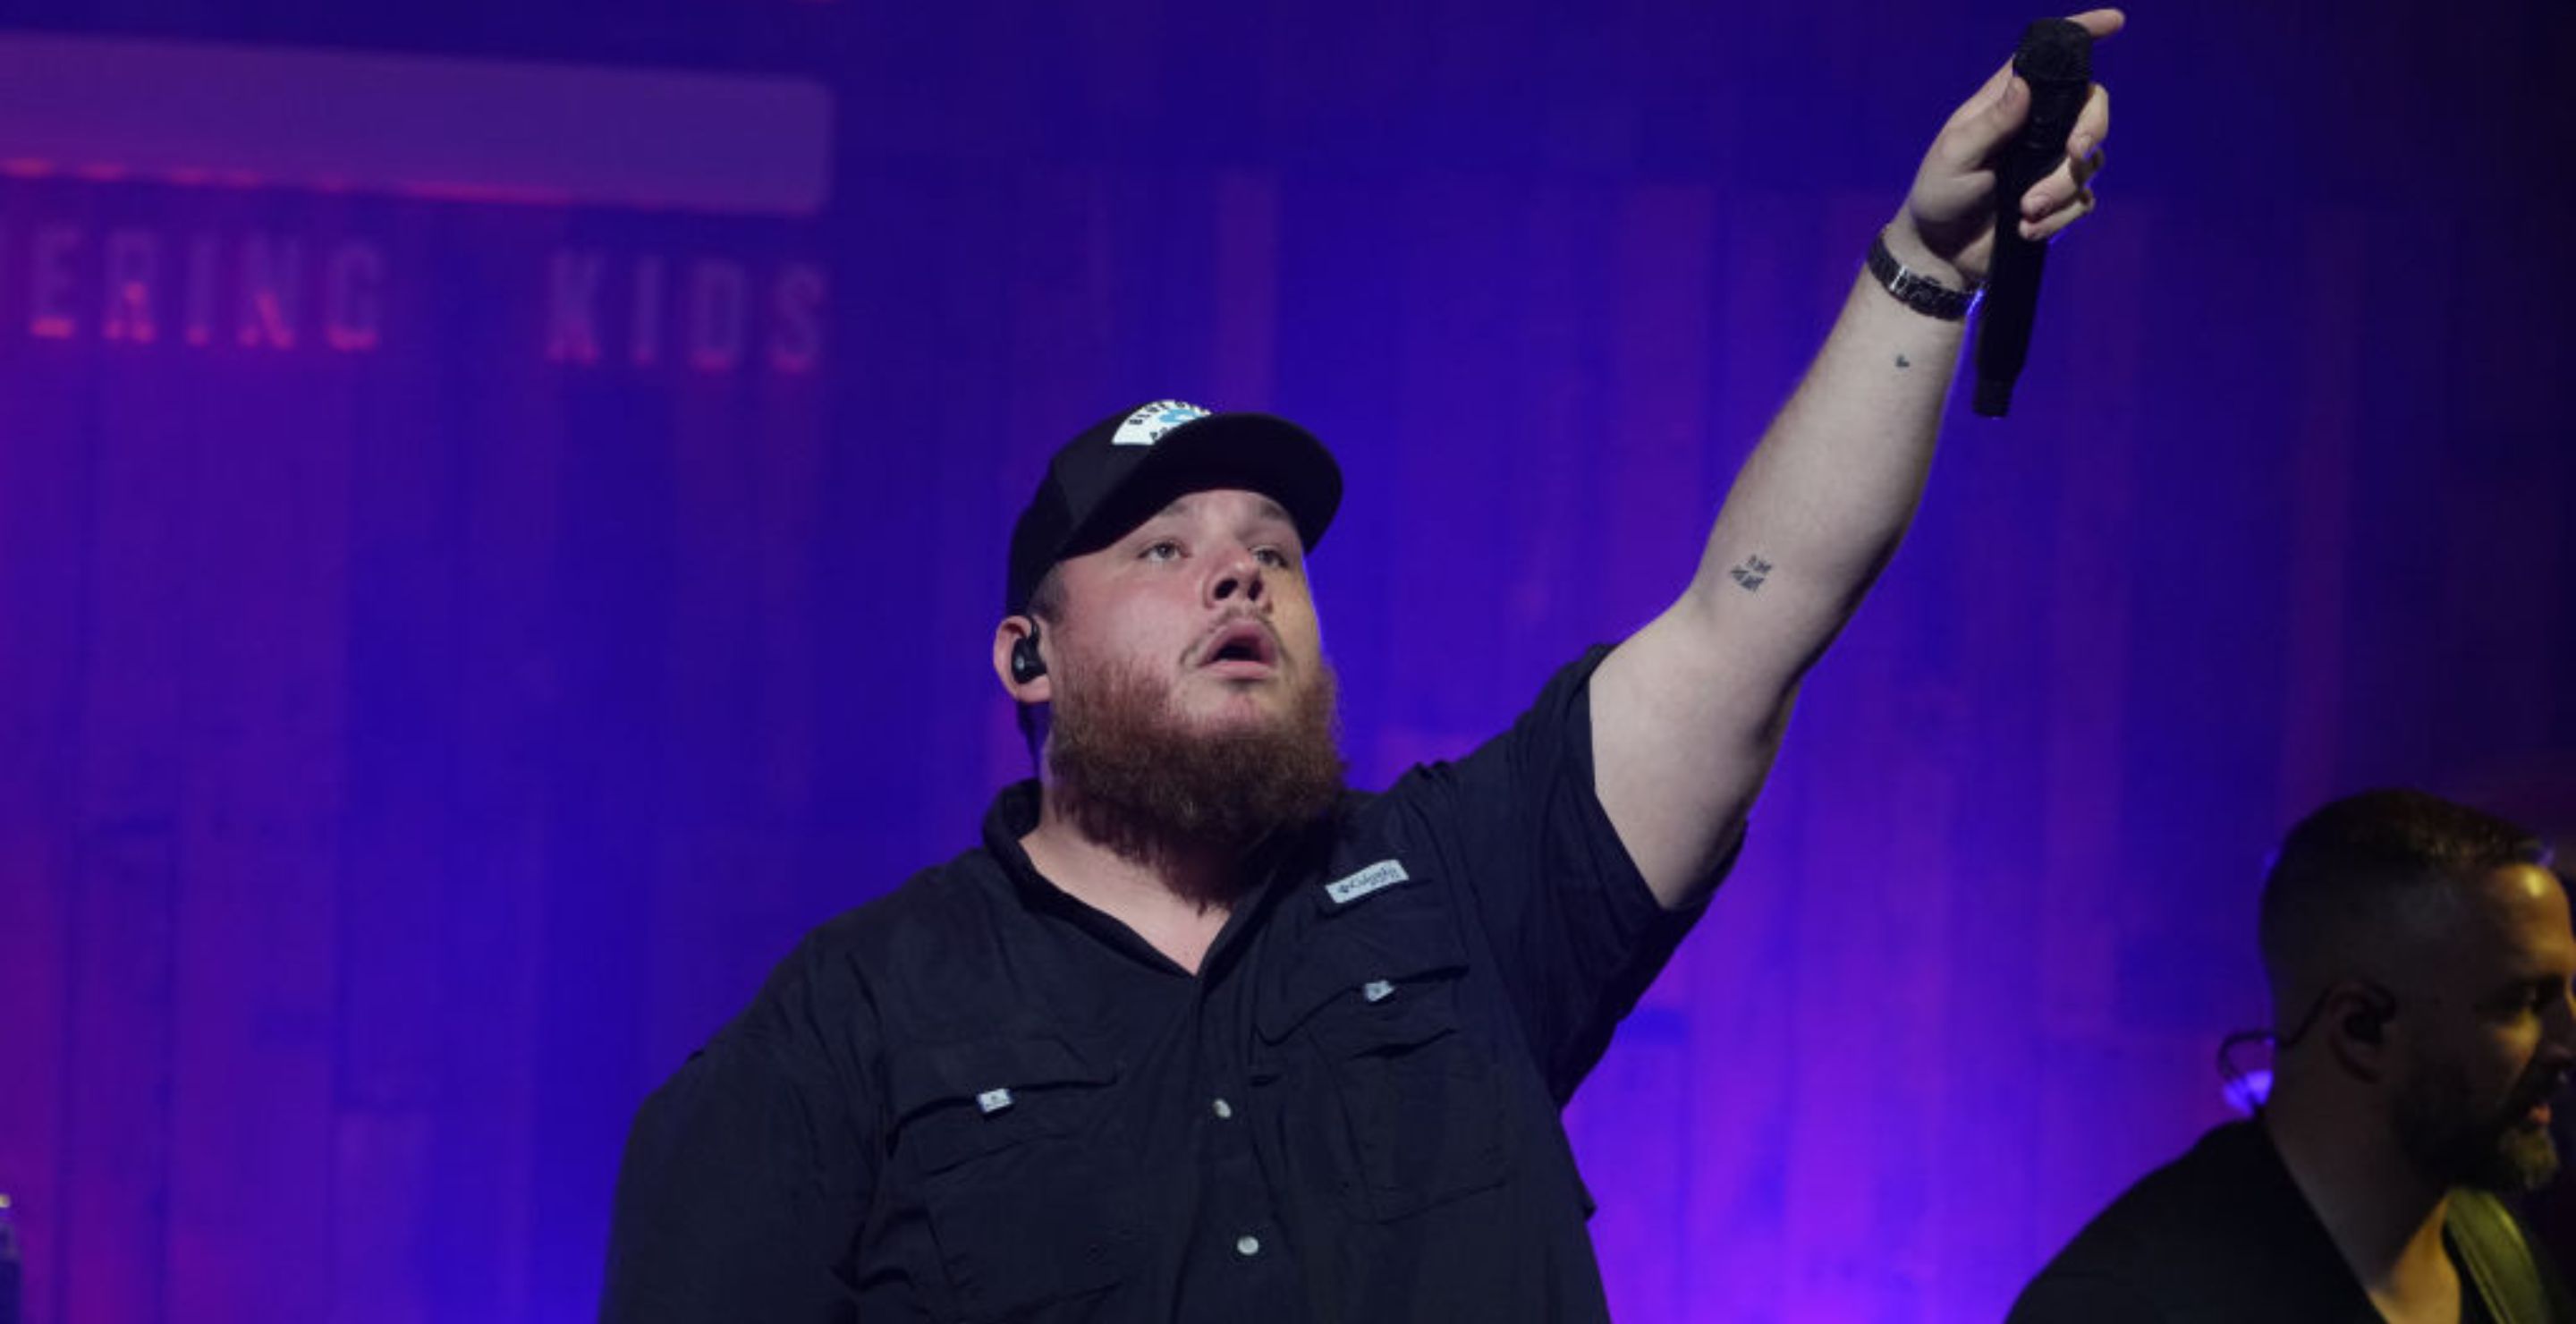 Luke Combs Falling During A Concert Somehow Makes Him Infinitely More Likable